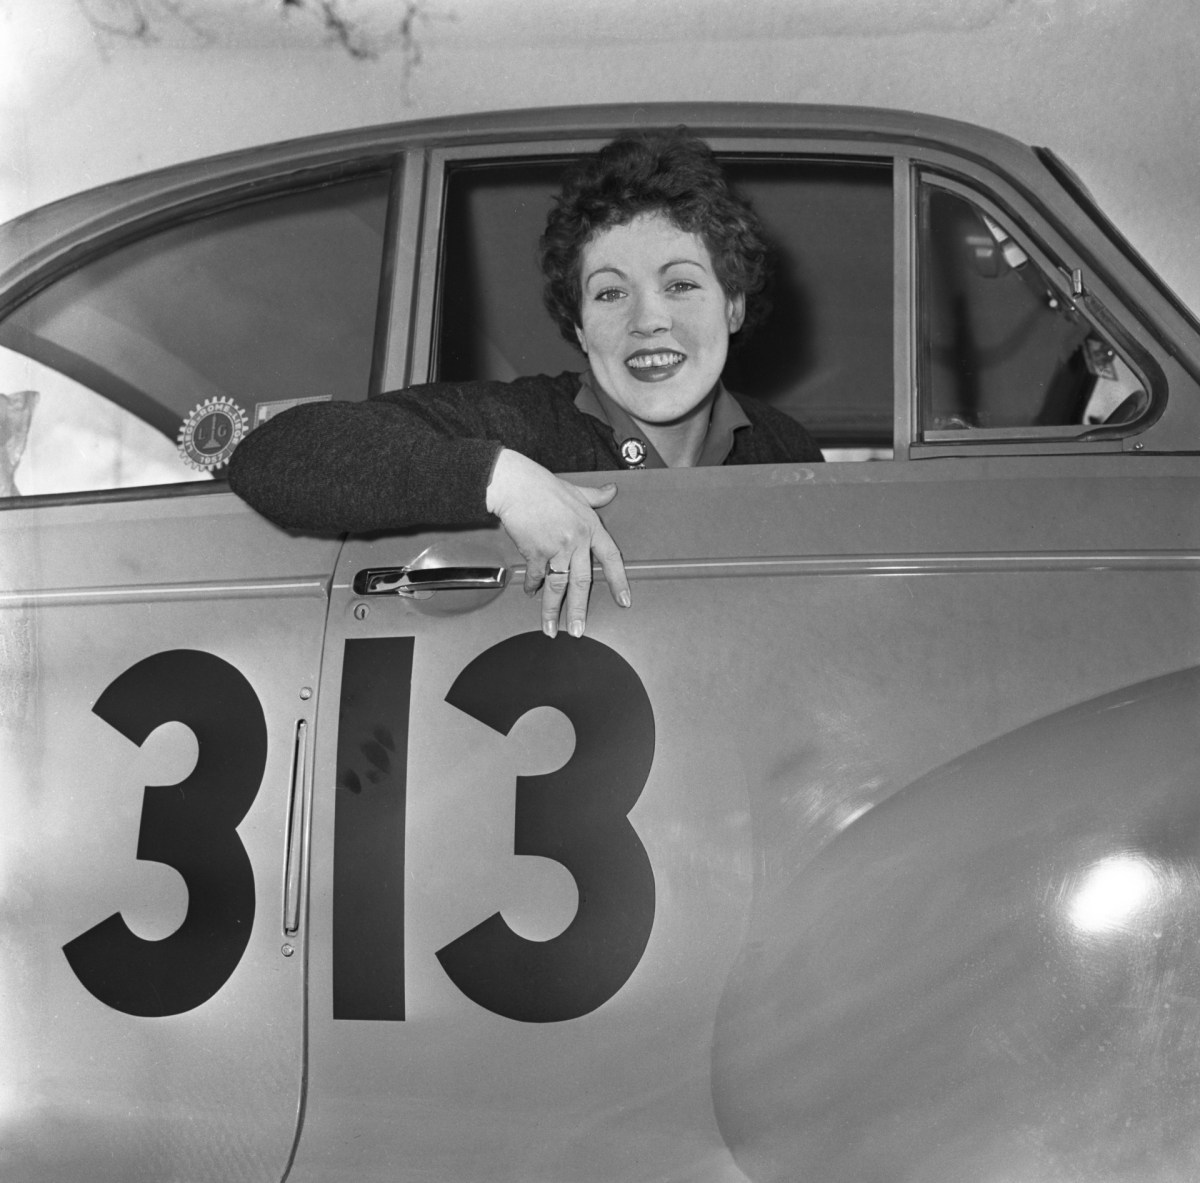 A black and white photo of rally driver Pat Moss smiling through the window of her car before the start of the 1958 Monte-Carlo Rally.